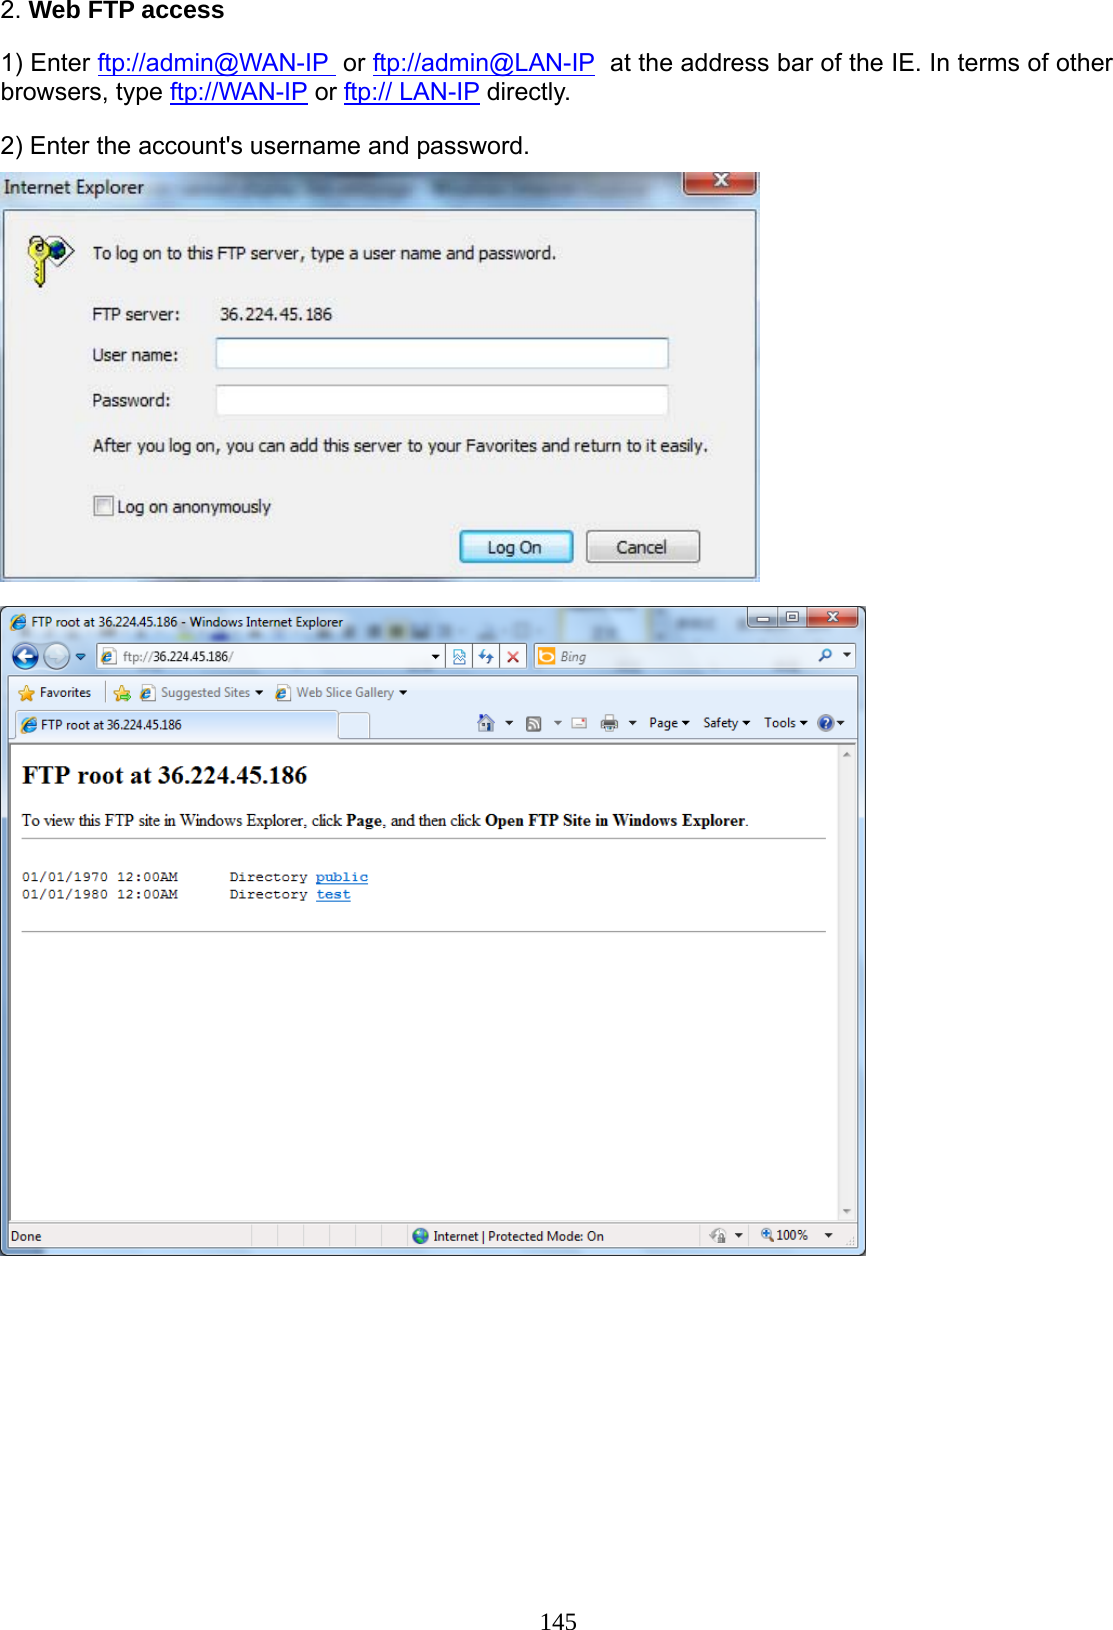 145 2. Web FTP access  1) Enter ftp://admin@WAN-IP  or ftp://admin@LAN-IP  at the address bar of the IE. In terms of other browsers, type ftp://WAN-IP or ftp:// LAN-IP directly. 2) Enter the account&apos;s username and password.    